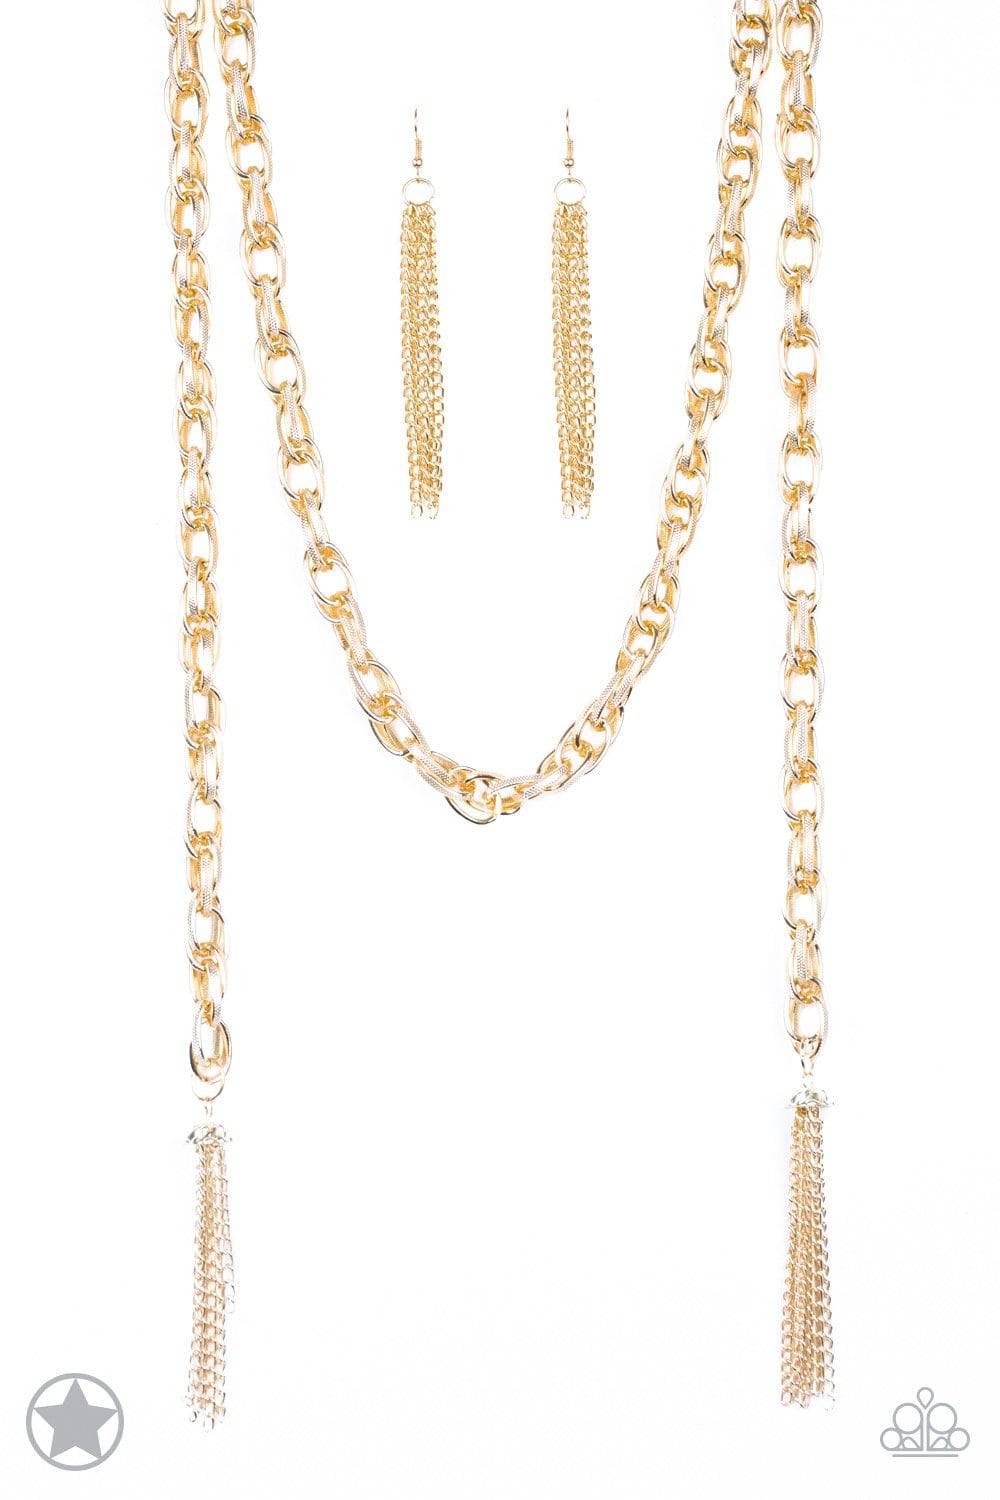 SCARFed for Attention - Gold Necklace - Paparazzi Accessories - GlaMarous Titi Jewels